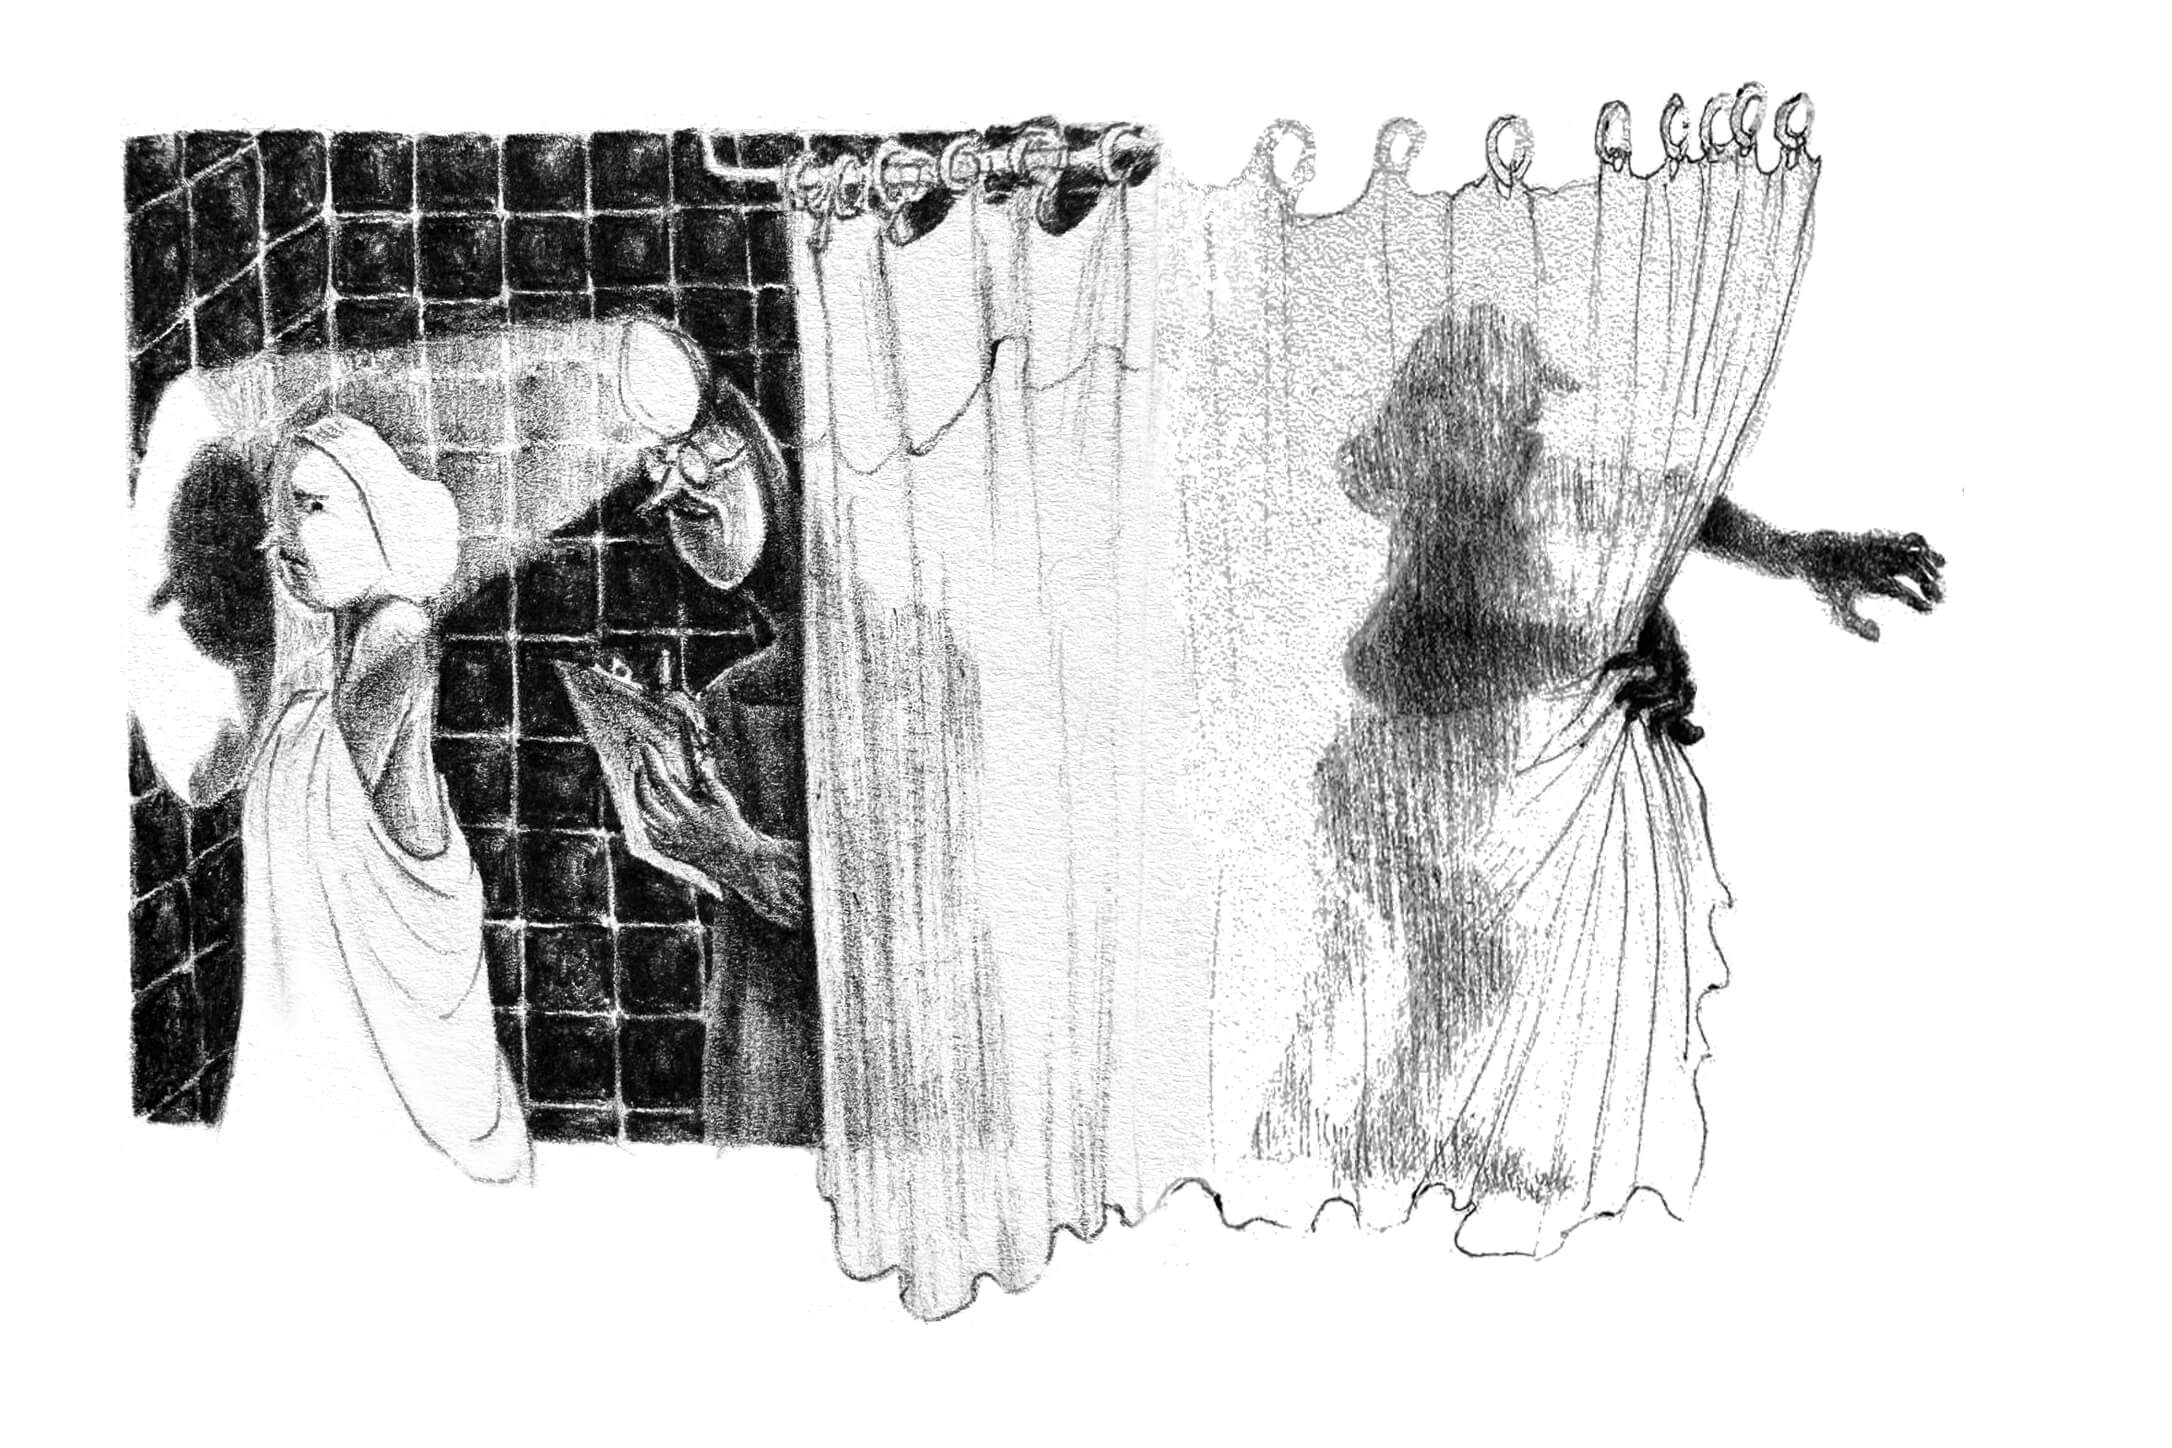 Scene 1:
First, a hospital check-up: in a cramped room, a doctor stands behind a curtain and shines a large round headlamp at a patient’s face, casting their shadow in profile on a tiled wall. The doctor records notes on his clipboard. The patient’s robe slips off their shoulder as they look warily back toward the doctor.

We can hover over the page using an accessibility widget shaped like a circle. It is designed to mimic the function of an x-ray in that it reveals a hidden layer underneath each image. Using this x-ray widget, it is revealed that the patient’s eyes fix upon another shadow on the far right of the image: it is their own shadow, slinking away behind the doctor. It pulls back the privacy curtain and, instead of dissipating, becomes more solid against the light. 